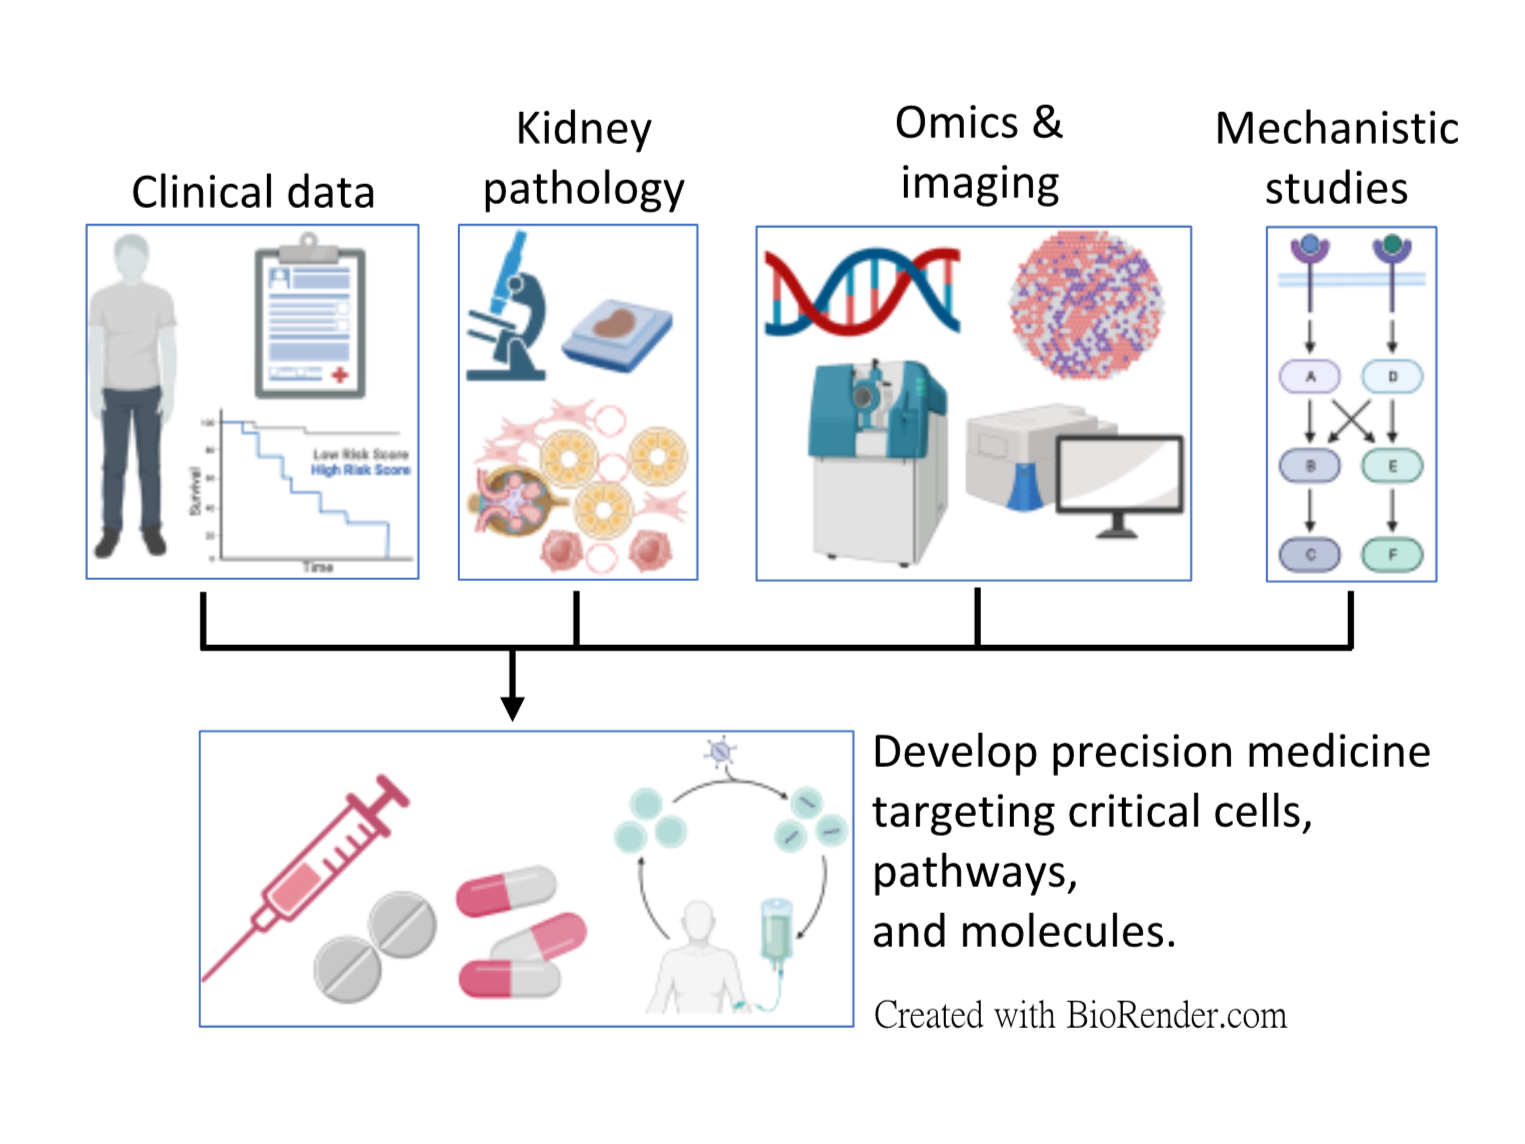 Targeting Kidney Pericytes as a Precision Medicine for Kidney Disease